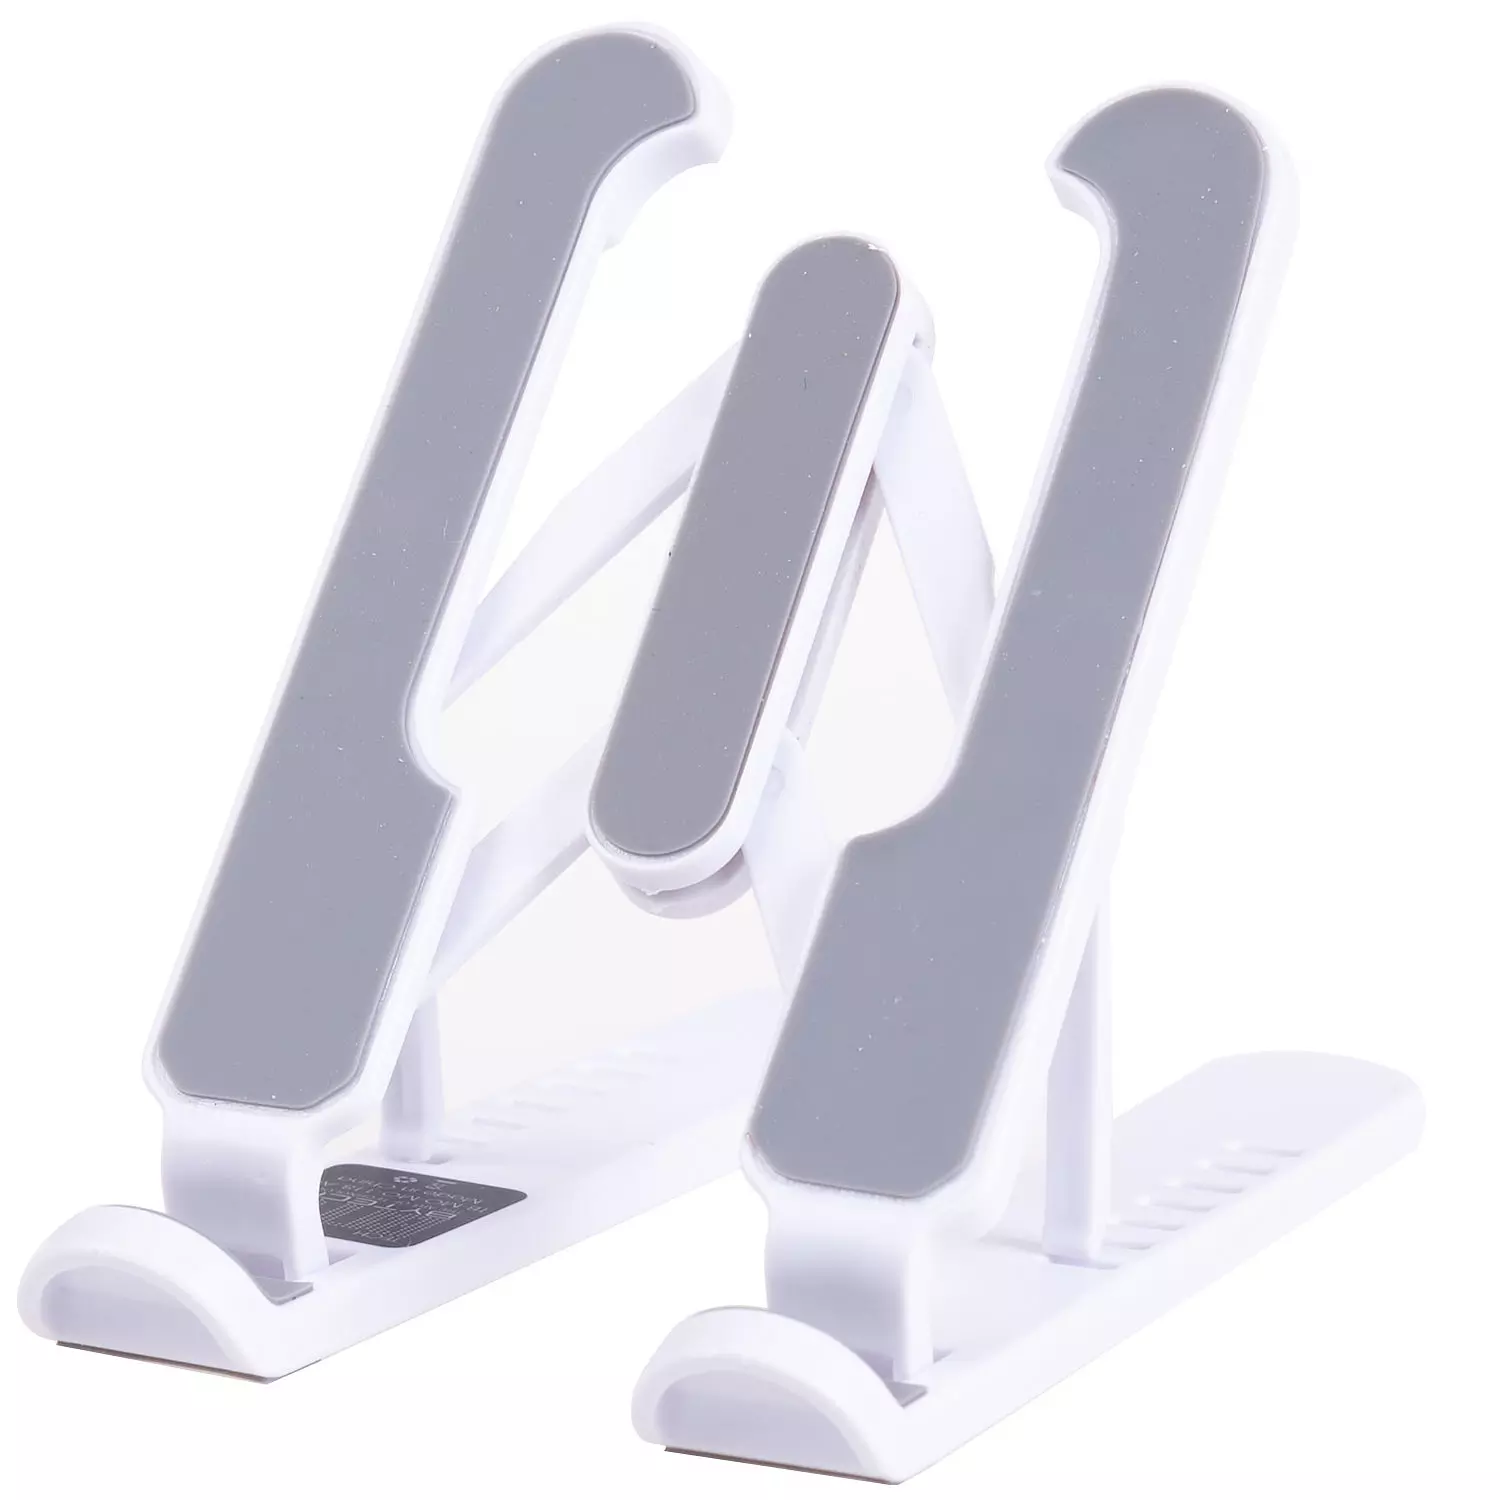 Bytech - Universal foldable stand for tablets, mobiles & game devices